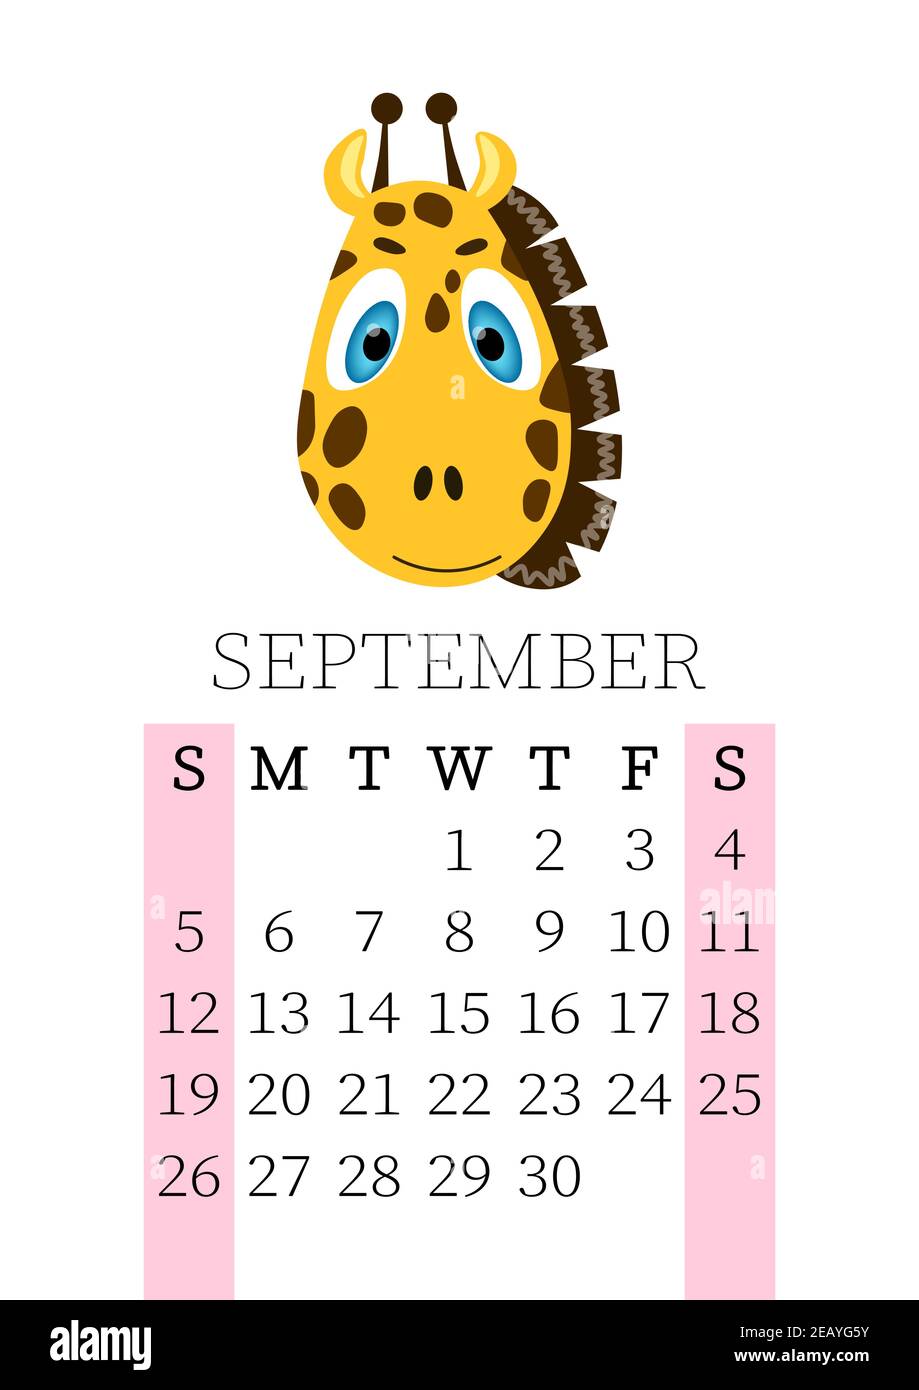 calendar 2021 monthly calendar for september 2021 from sunday to saturday yearly planner templates with cute hand drawn face animals vector stock vector image art alamy